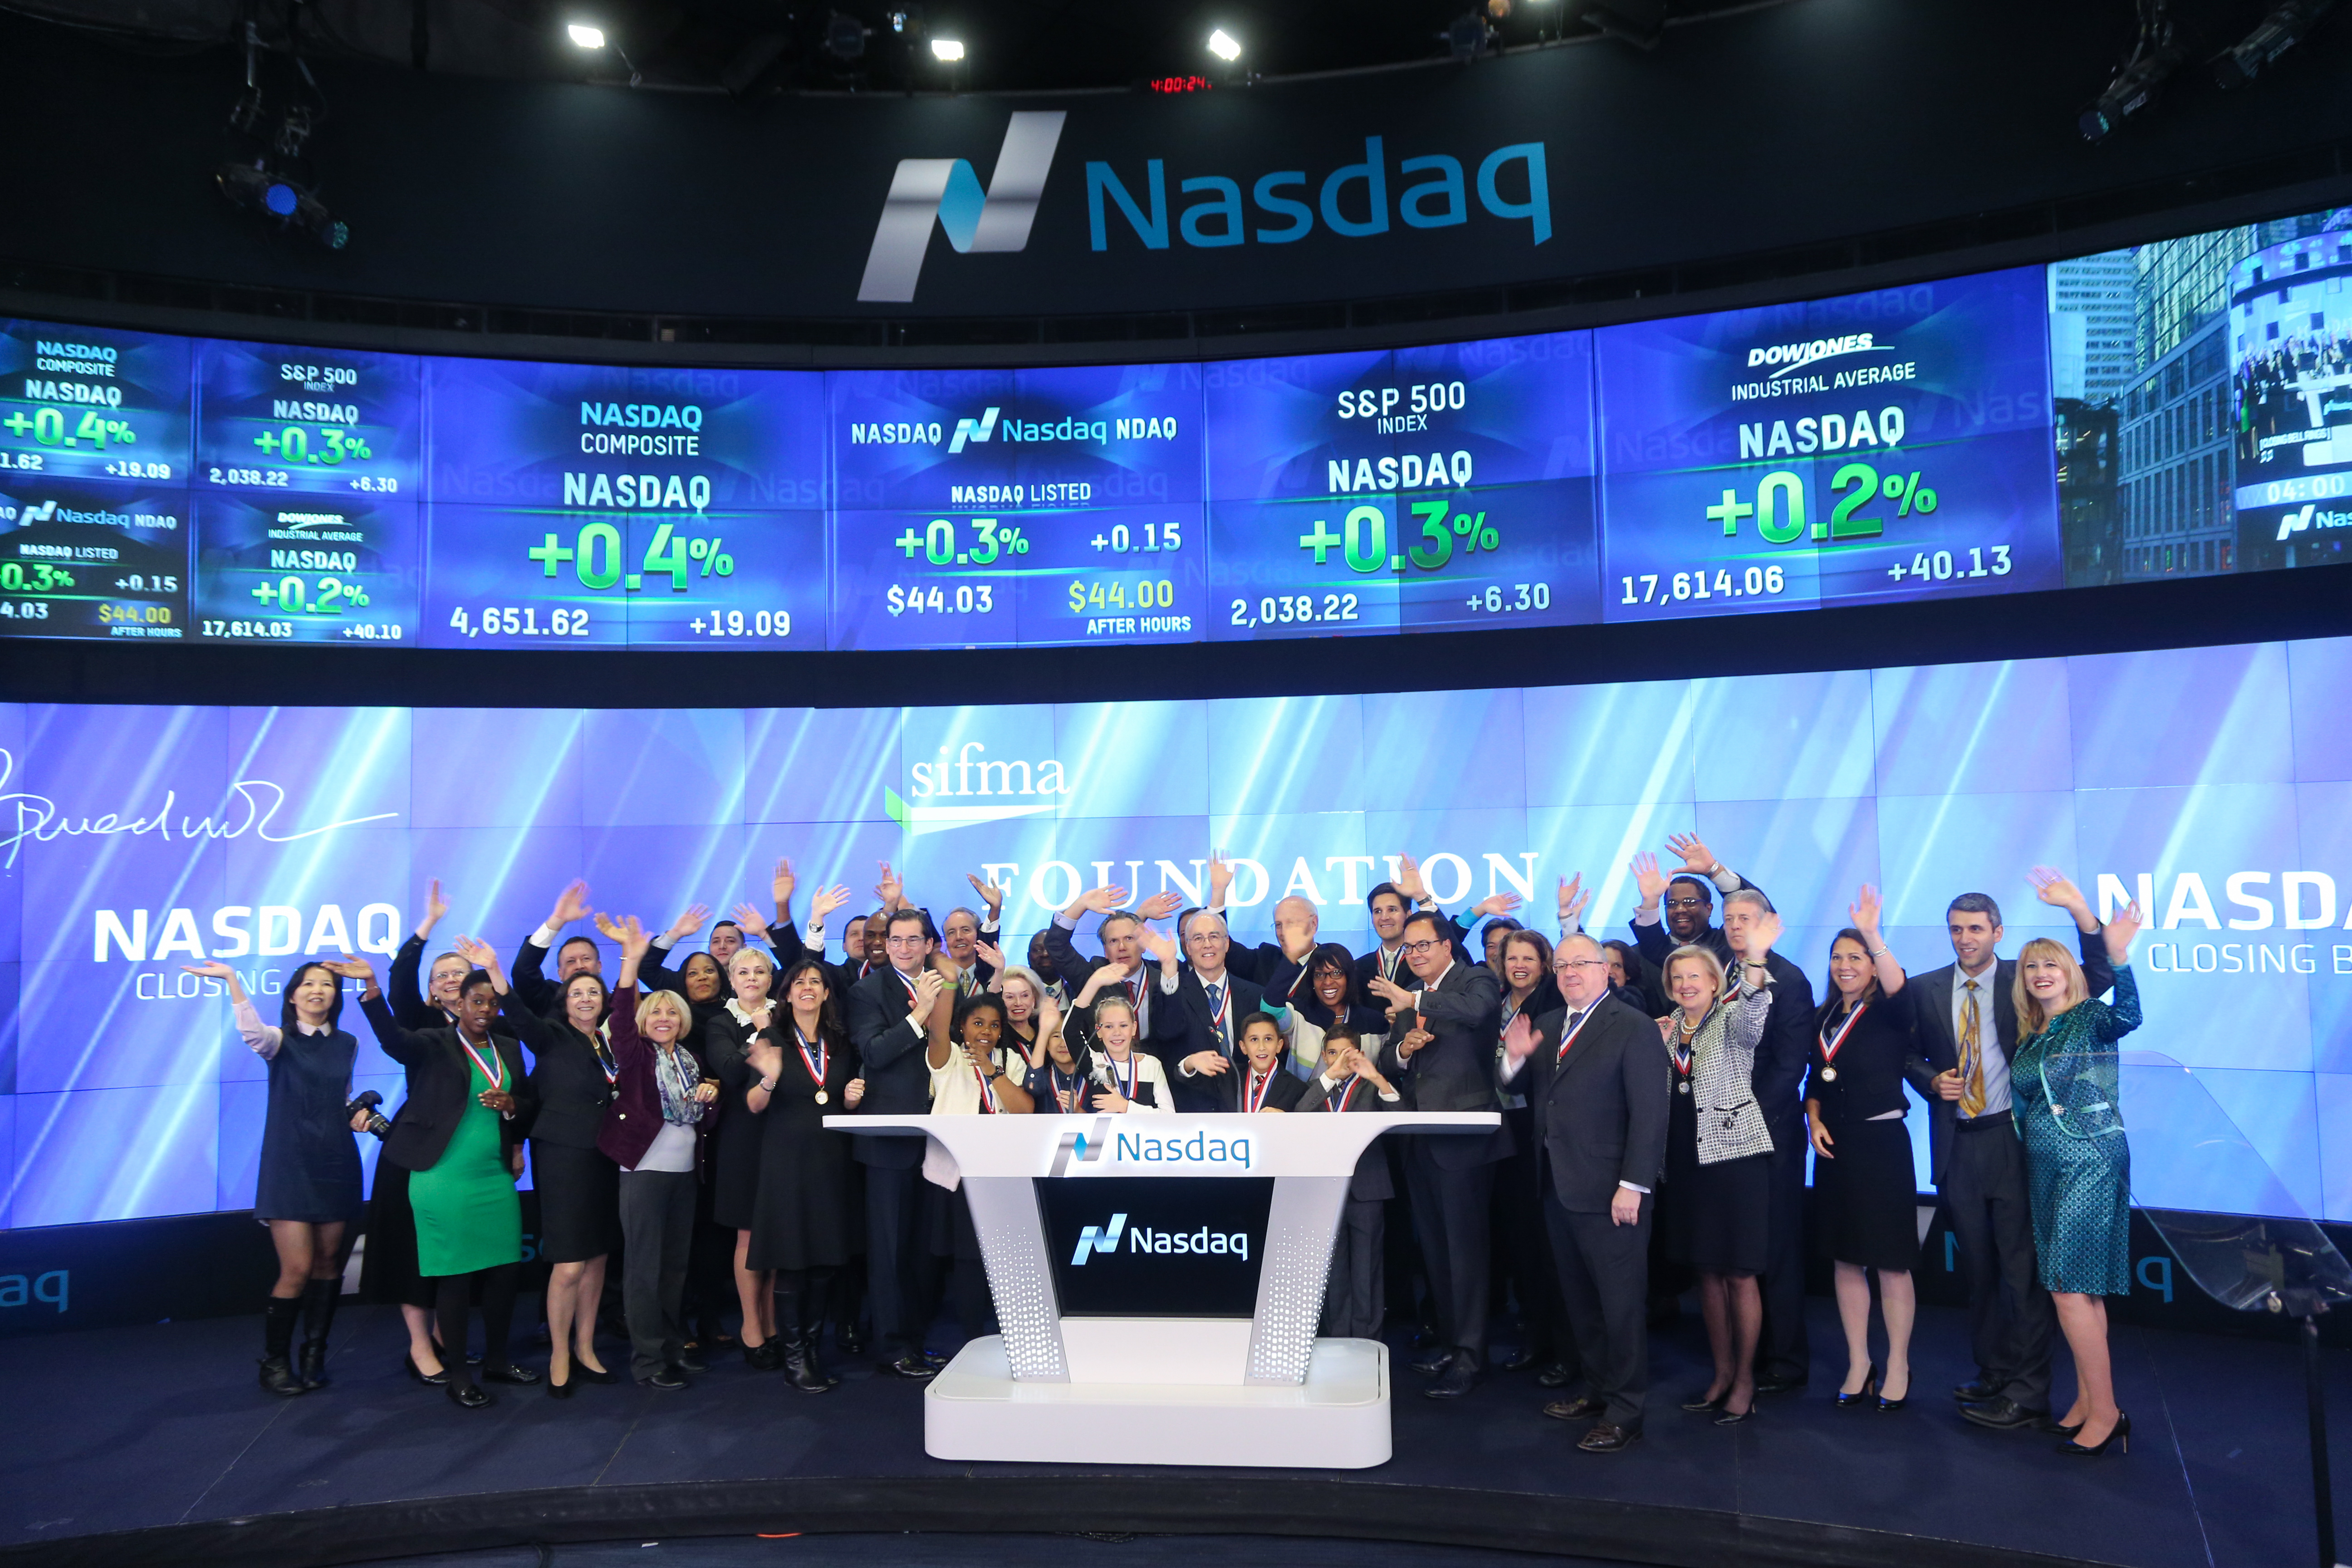 The SIFMA Foundation at the Nasdaq Closing Bell Ceremony